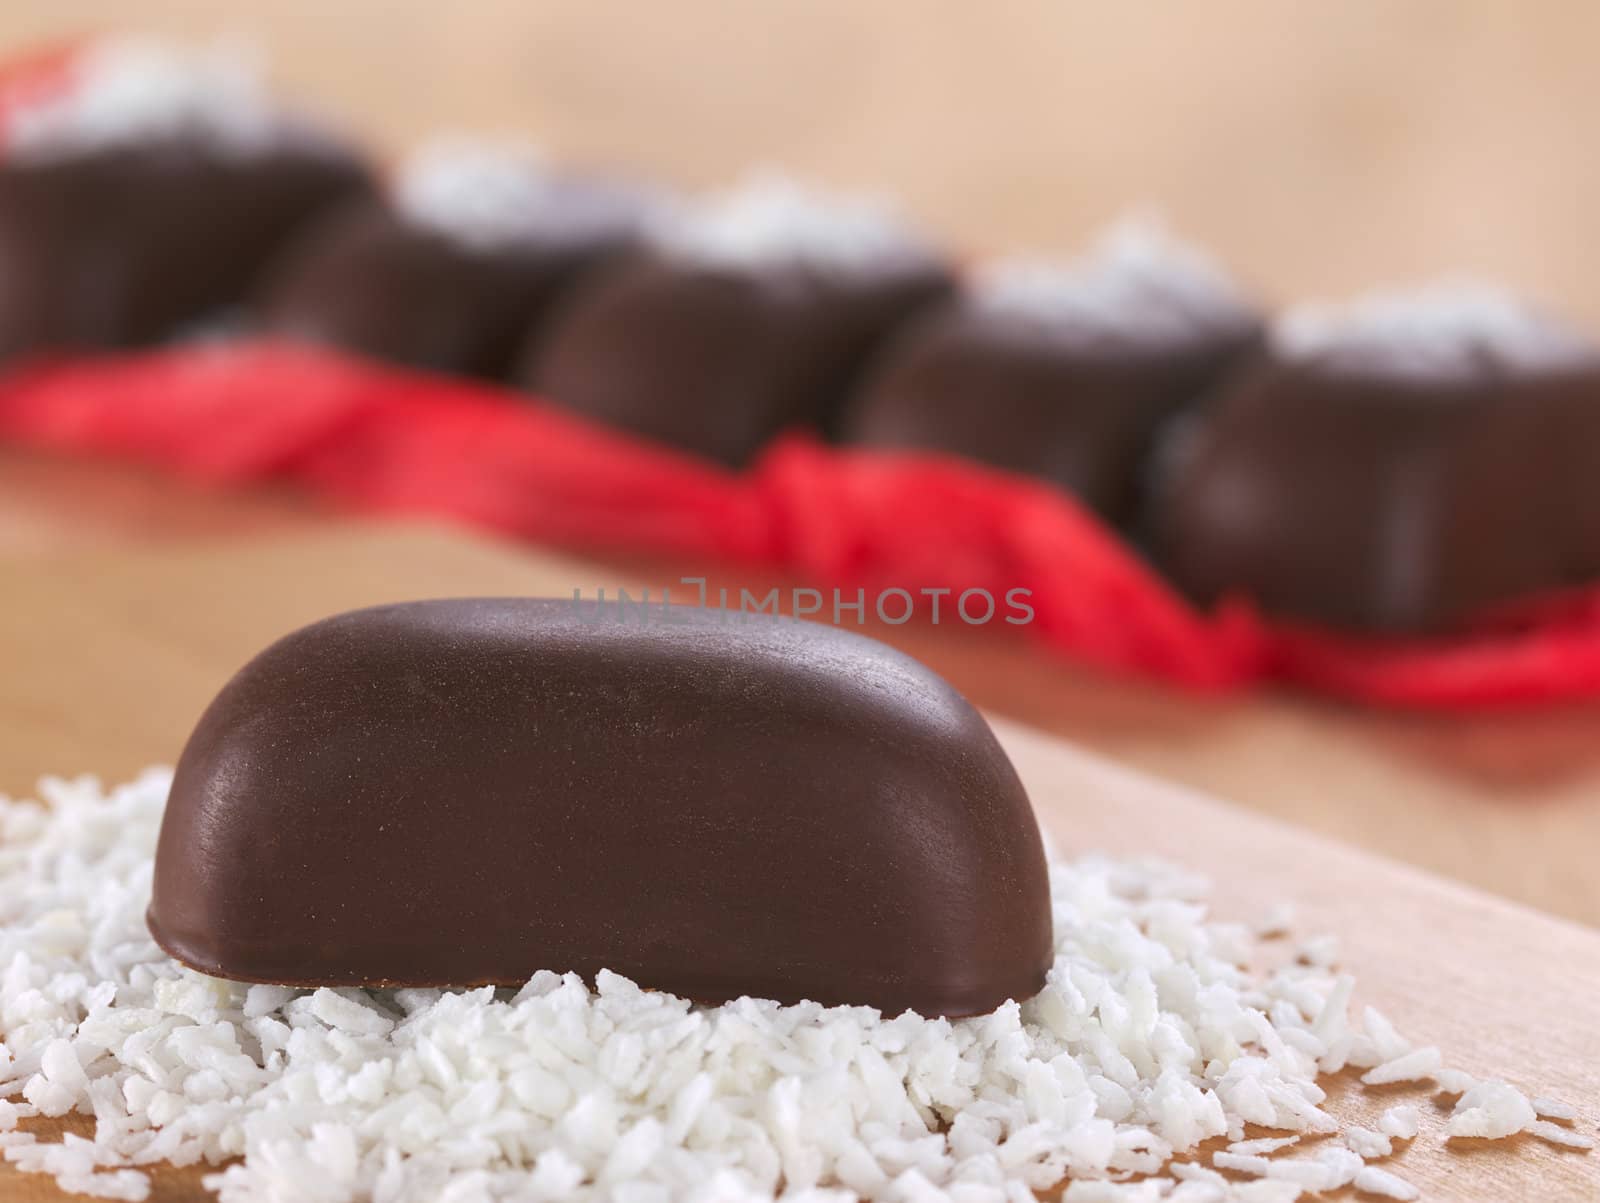 Chocolate Candy on Coconut by ildi